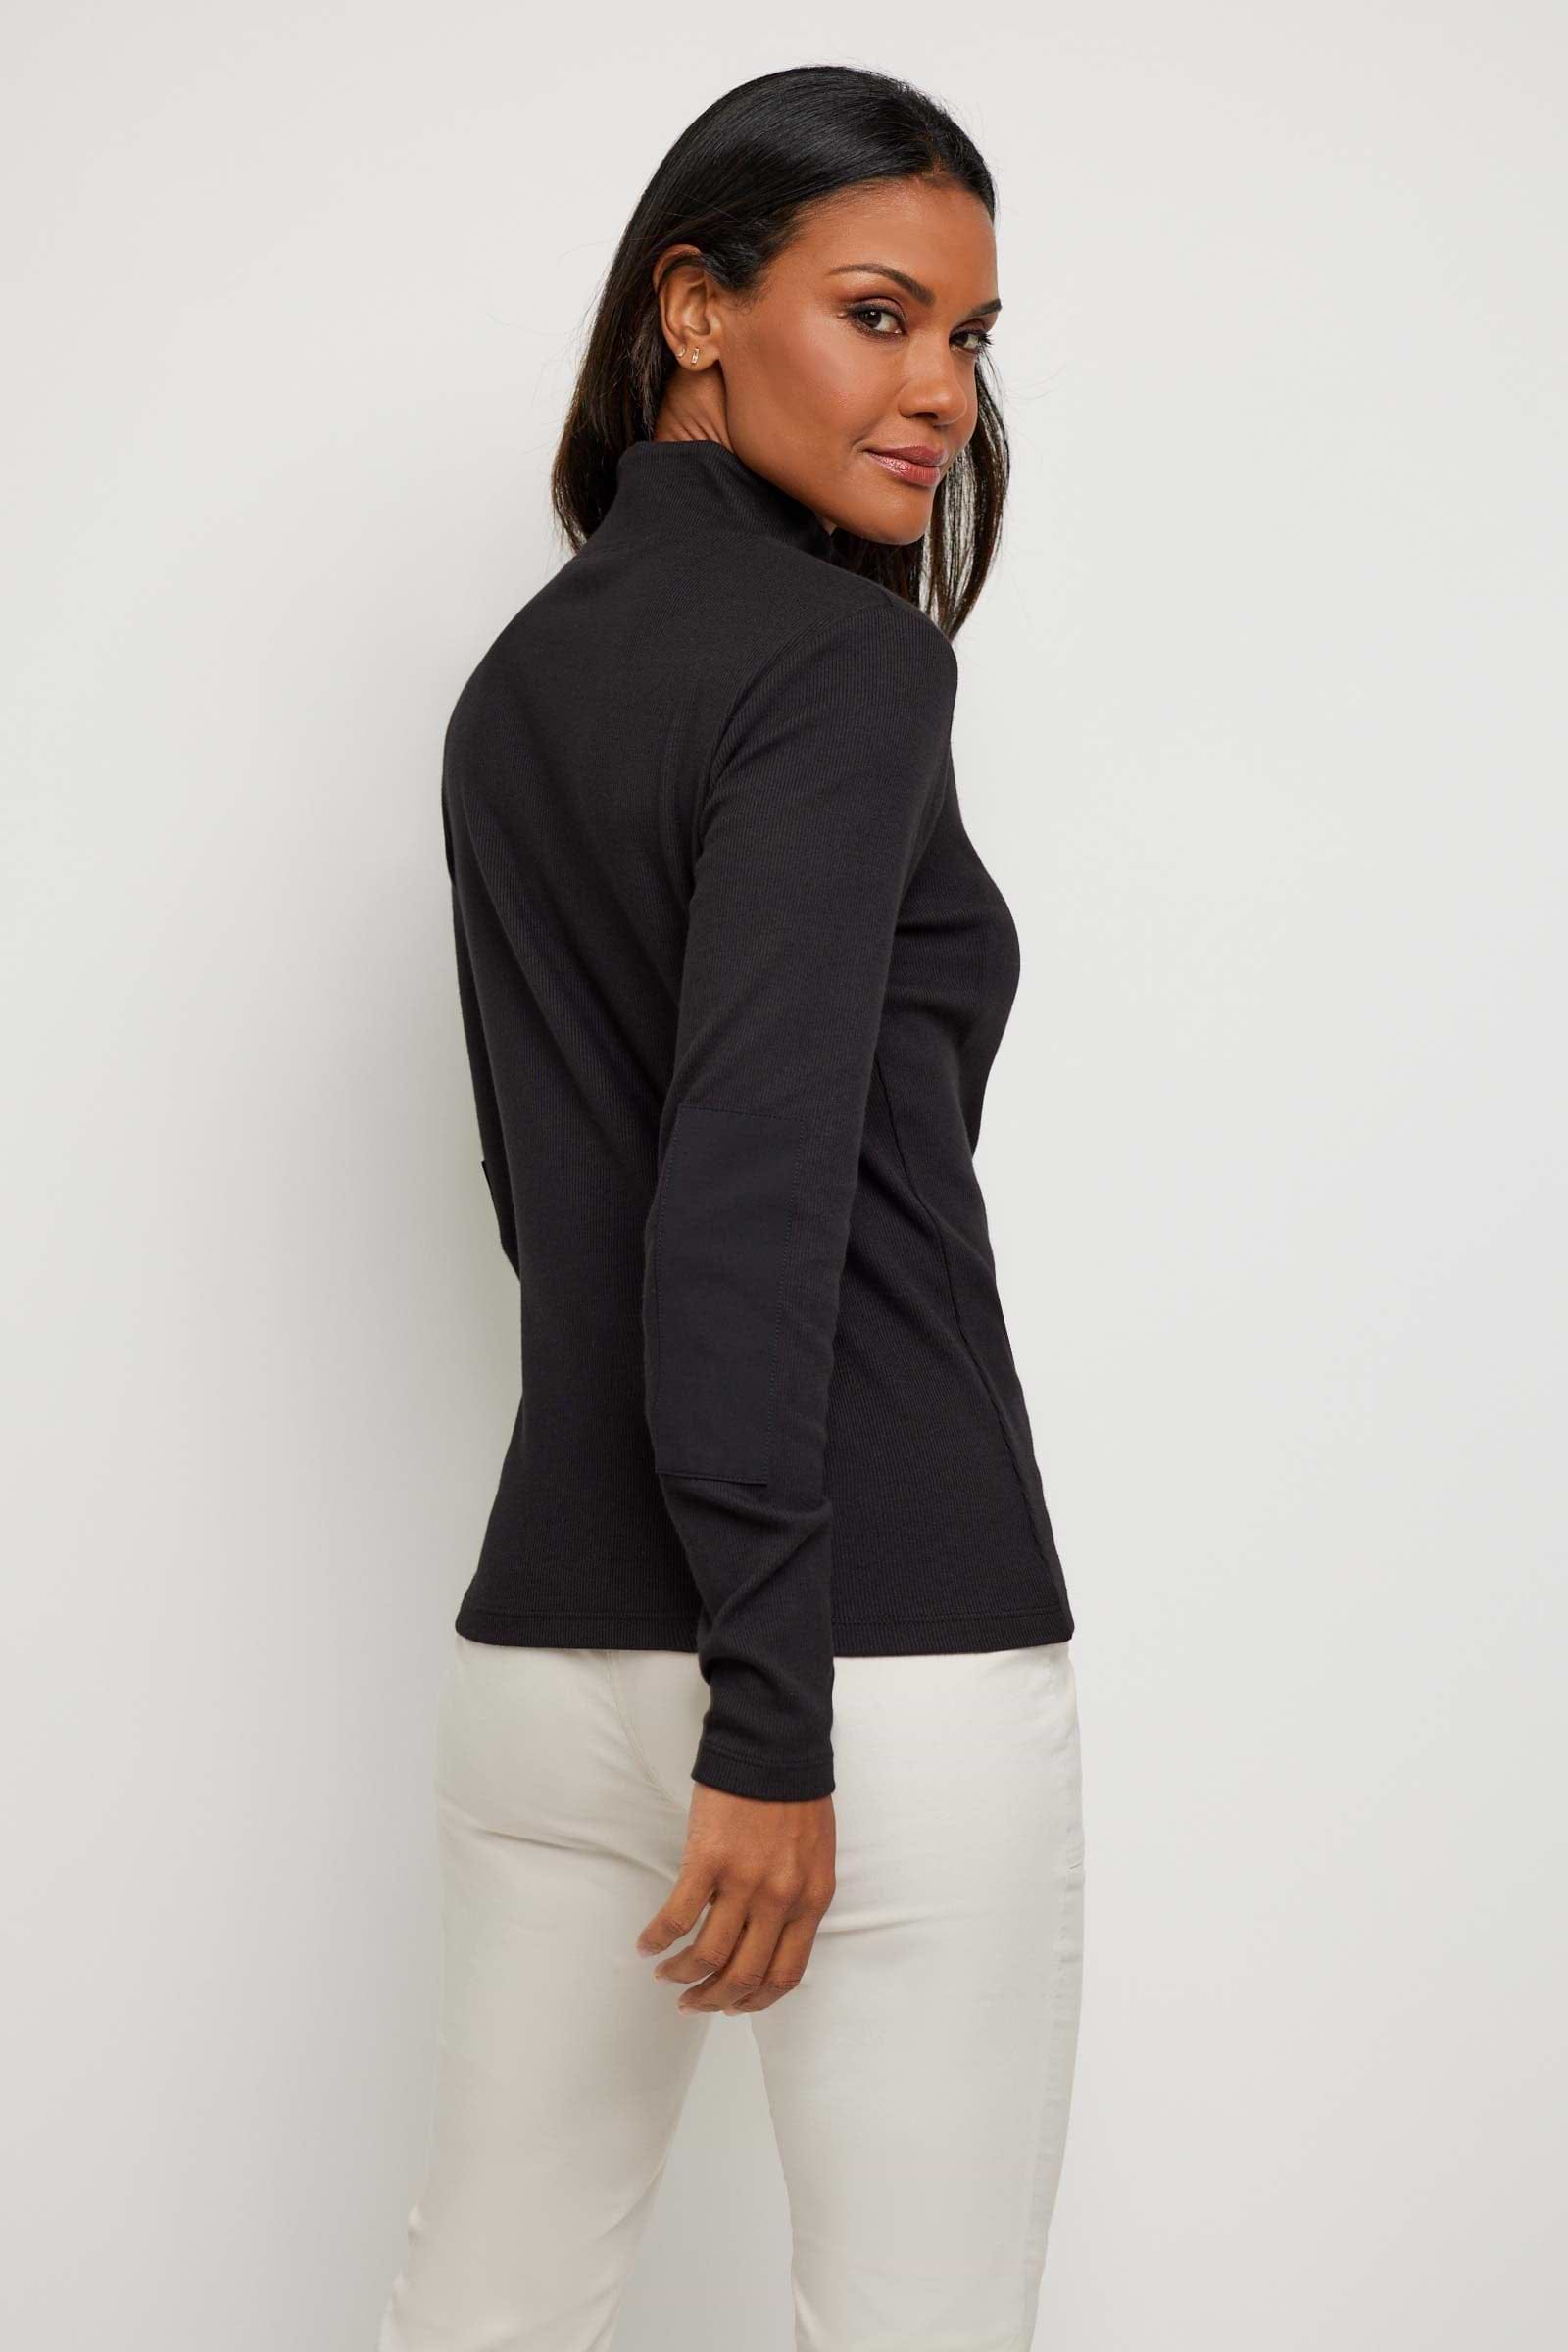 The Best Travel Top. Woman Showing the Back Side of a Monroe Henley Top in Black.